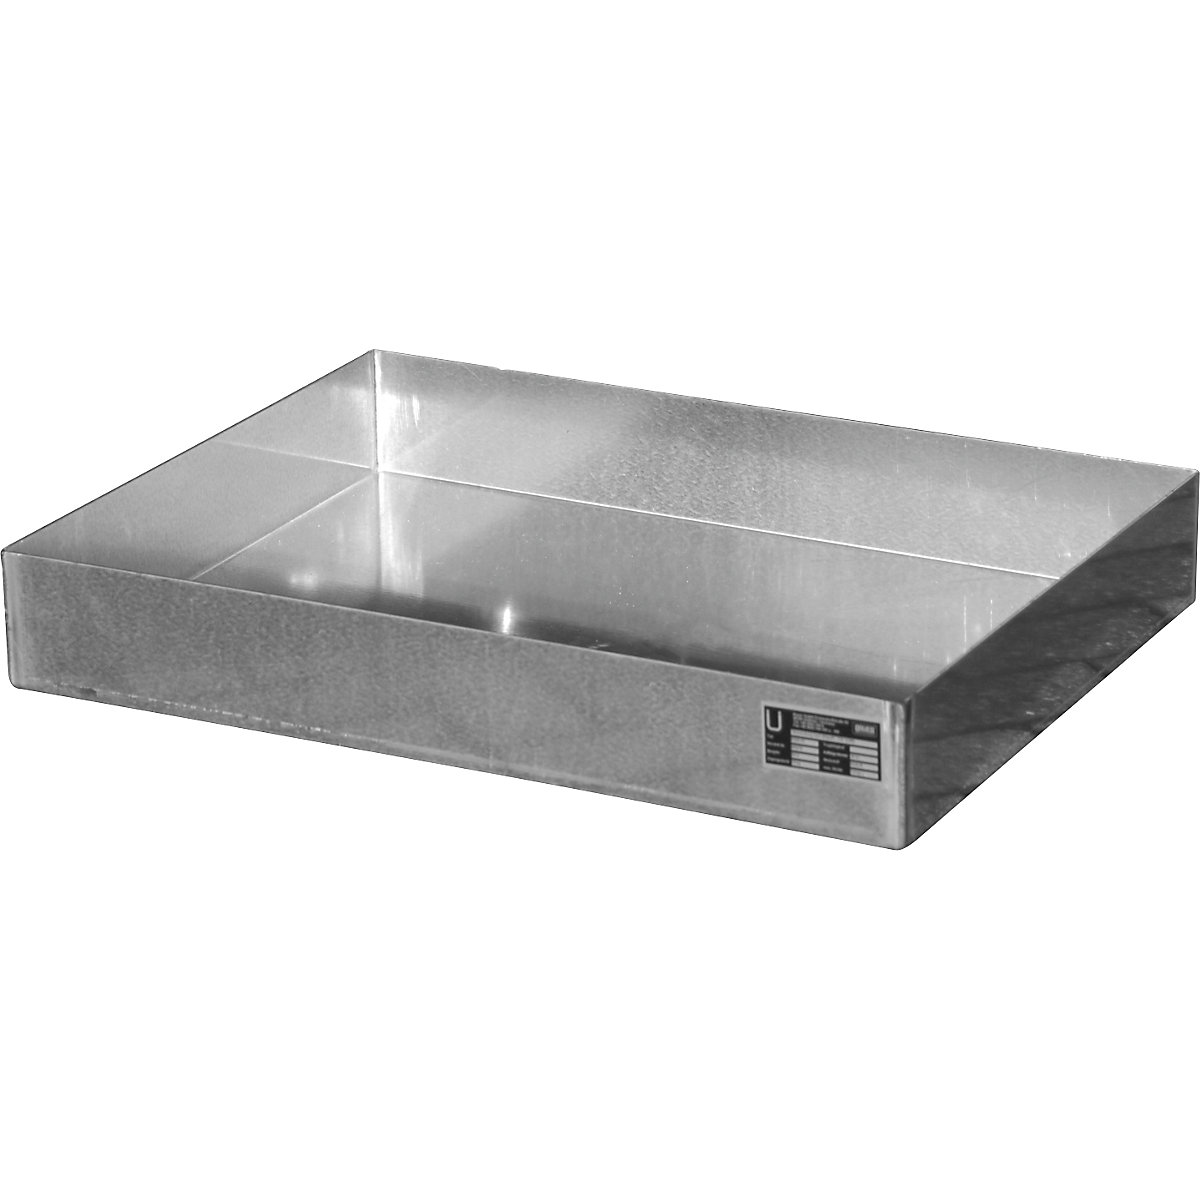 Stainless steel pallet tray – eurokraft pro, for small containers, 40 l, LxWxH 800 x 600 x 120 mm-6